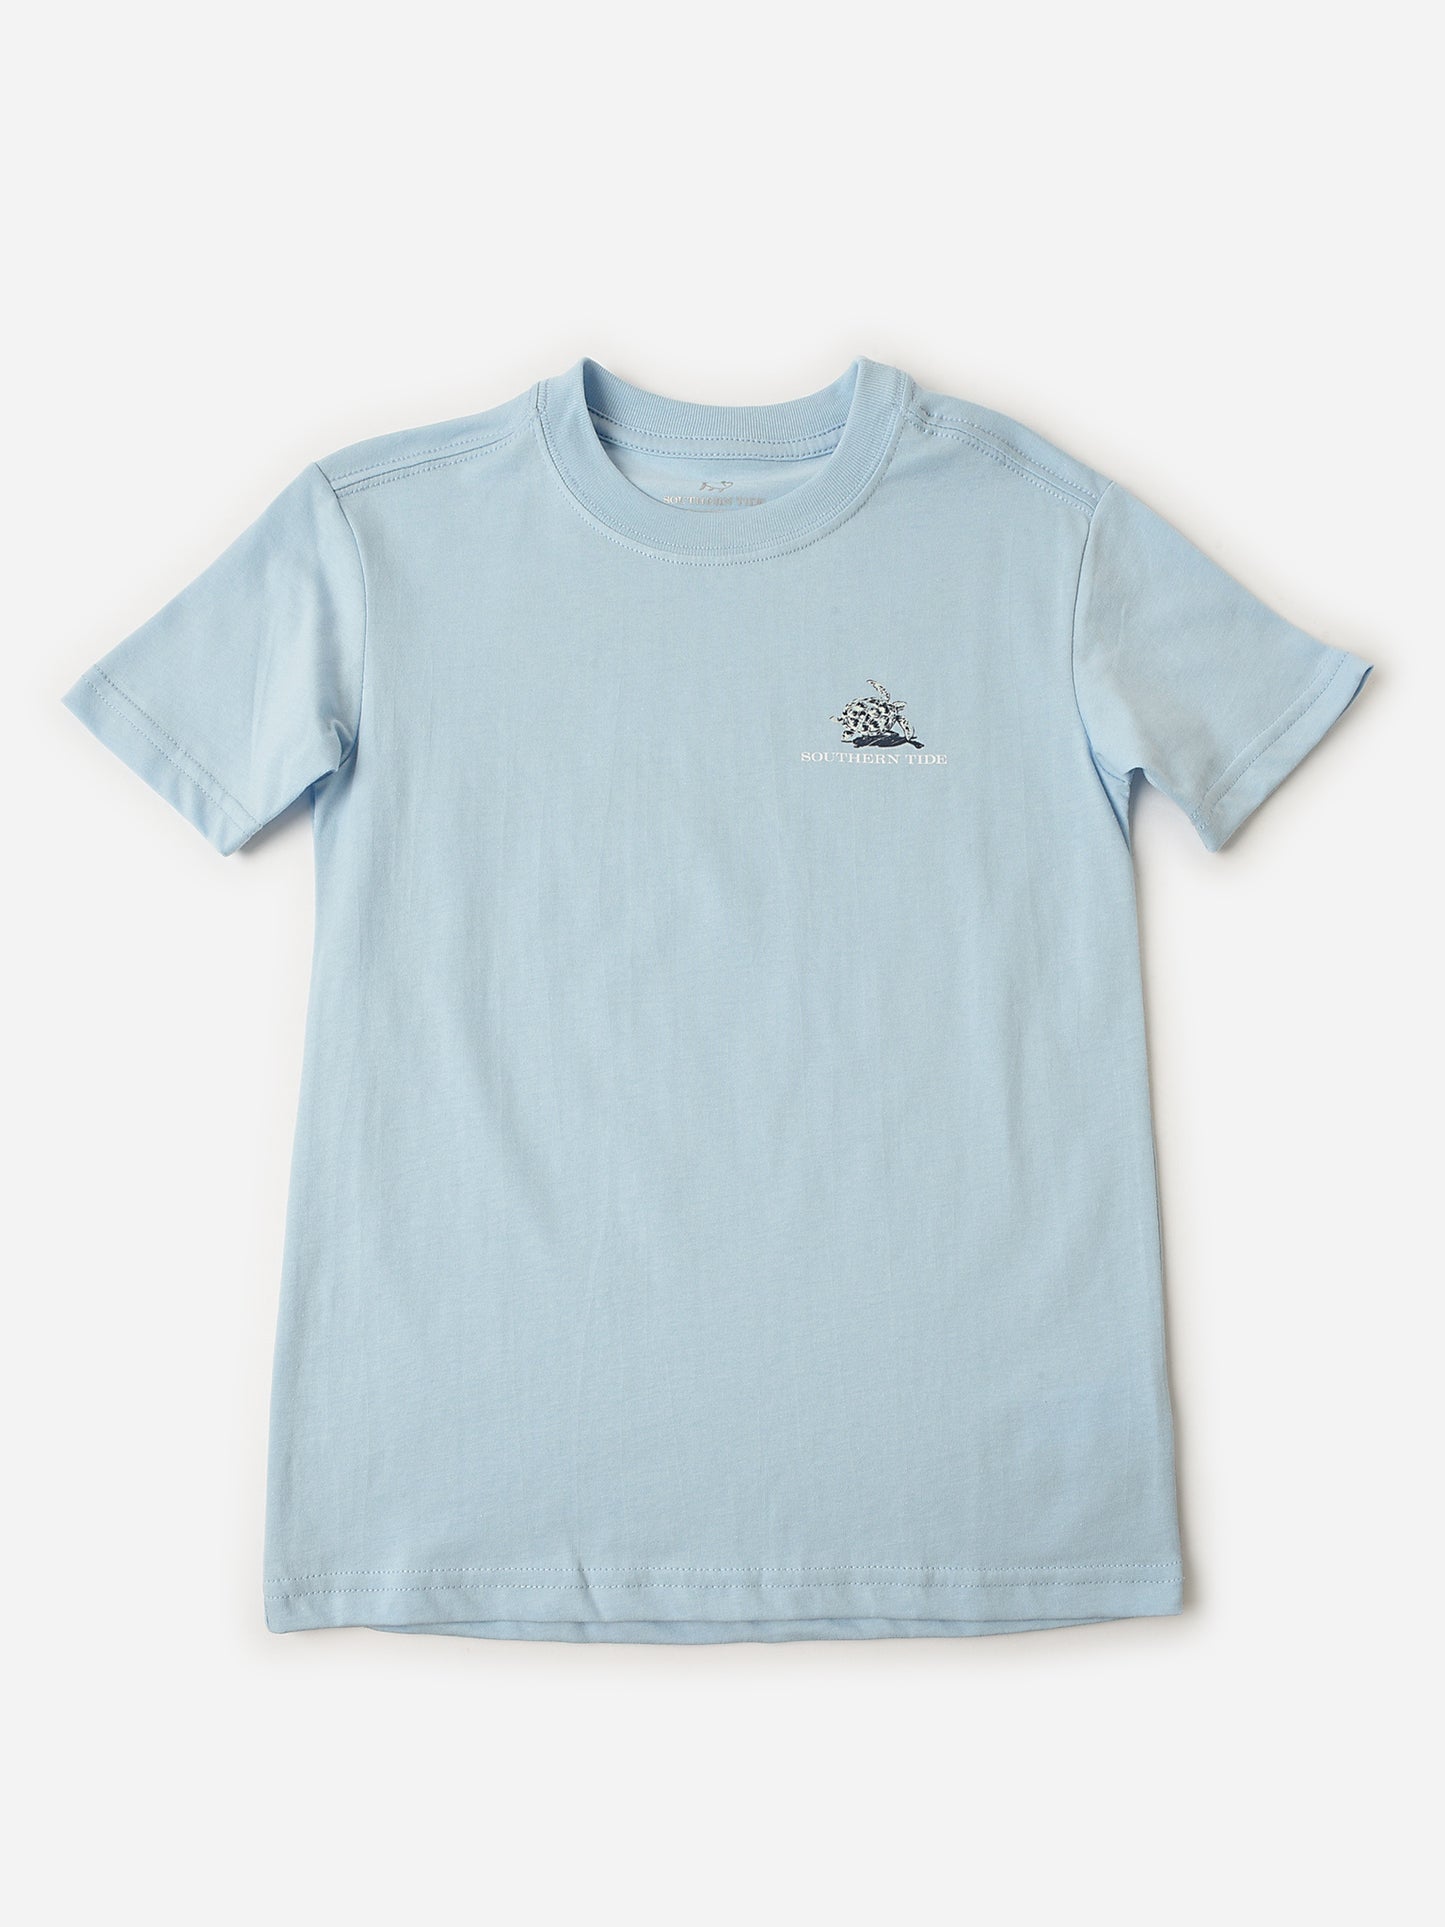 Southern Tide Boys' Yachts of Turtles Short Sleeve T-Shirt